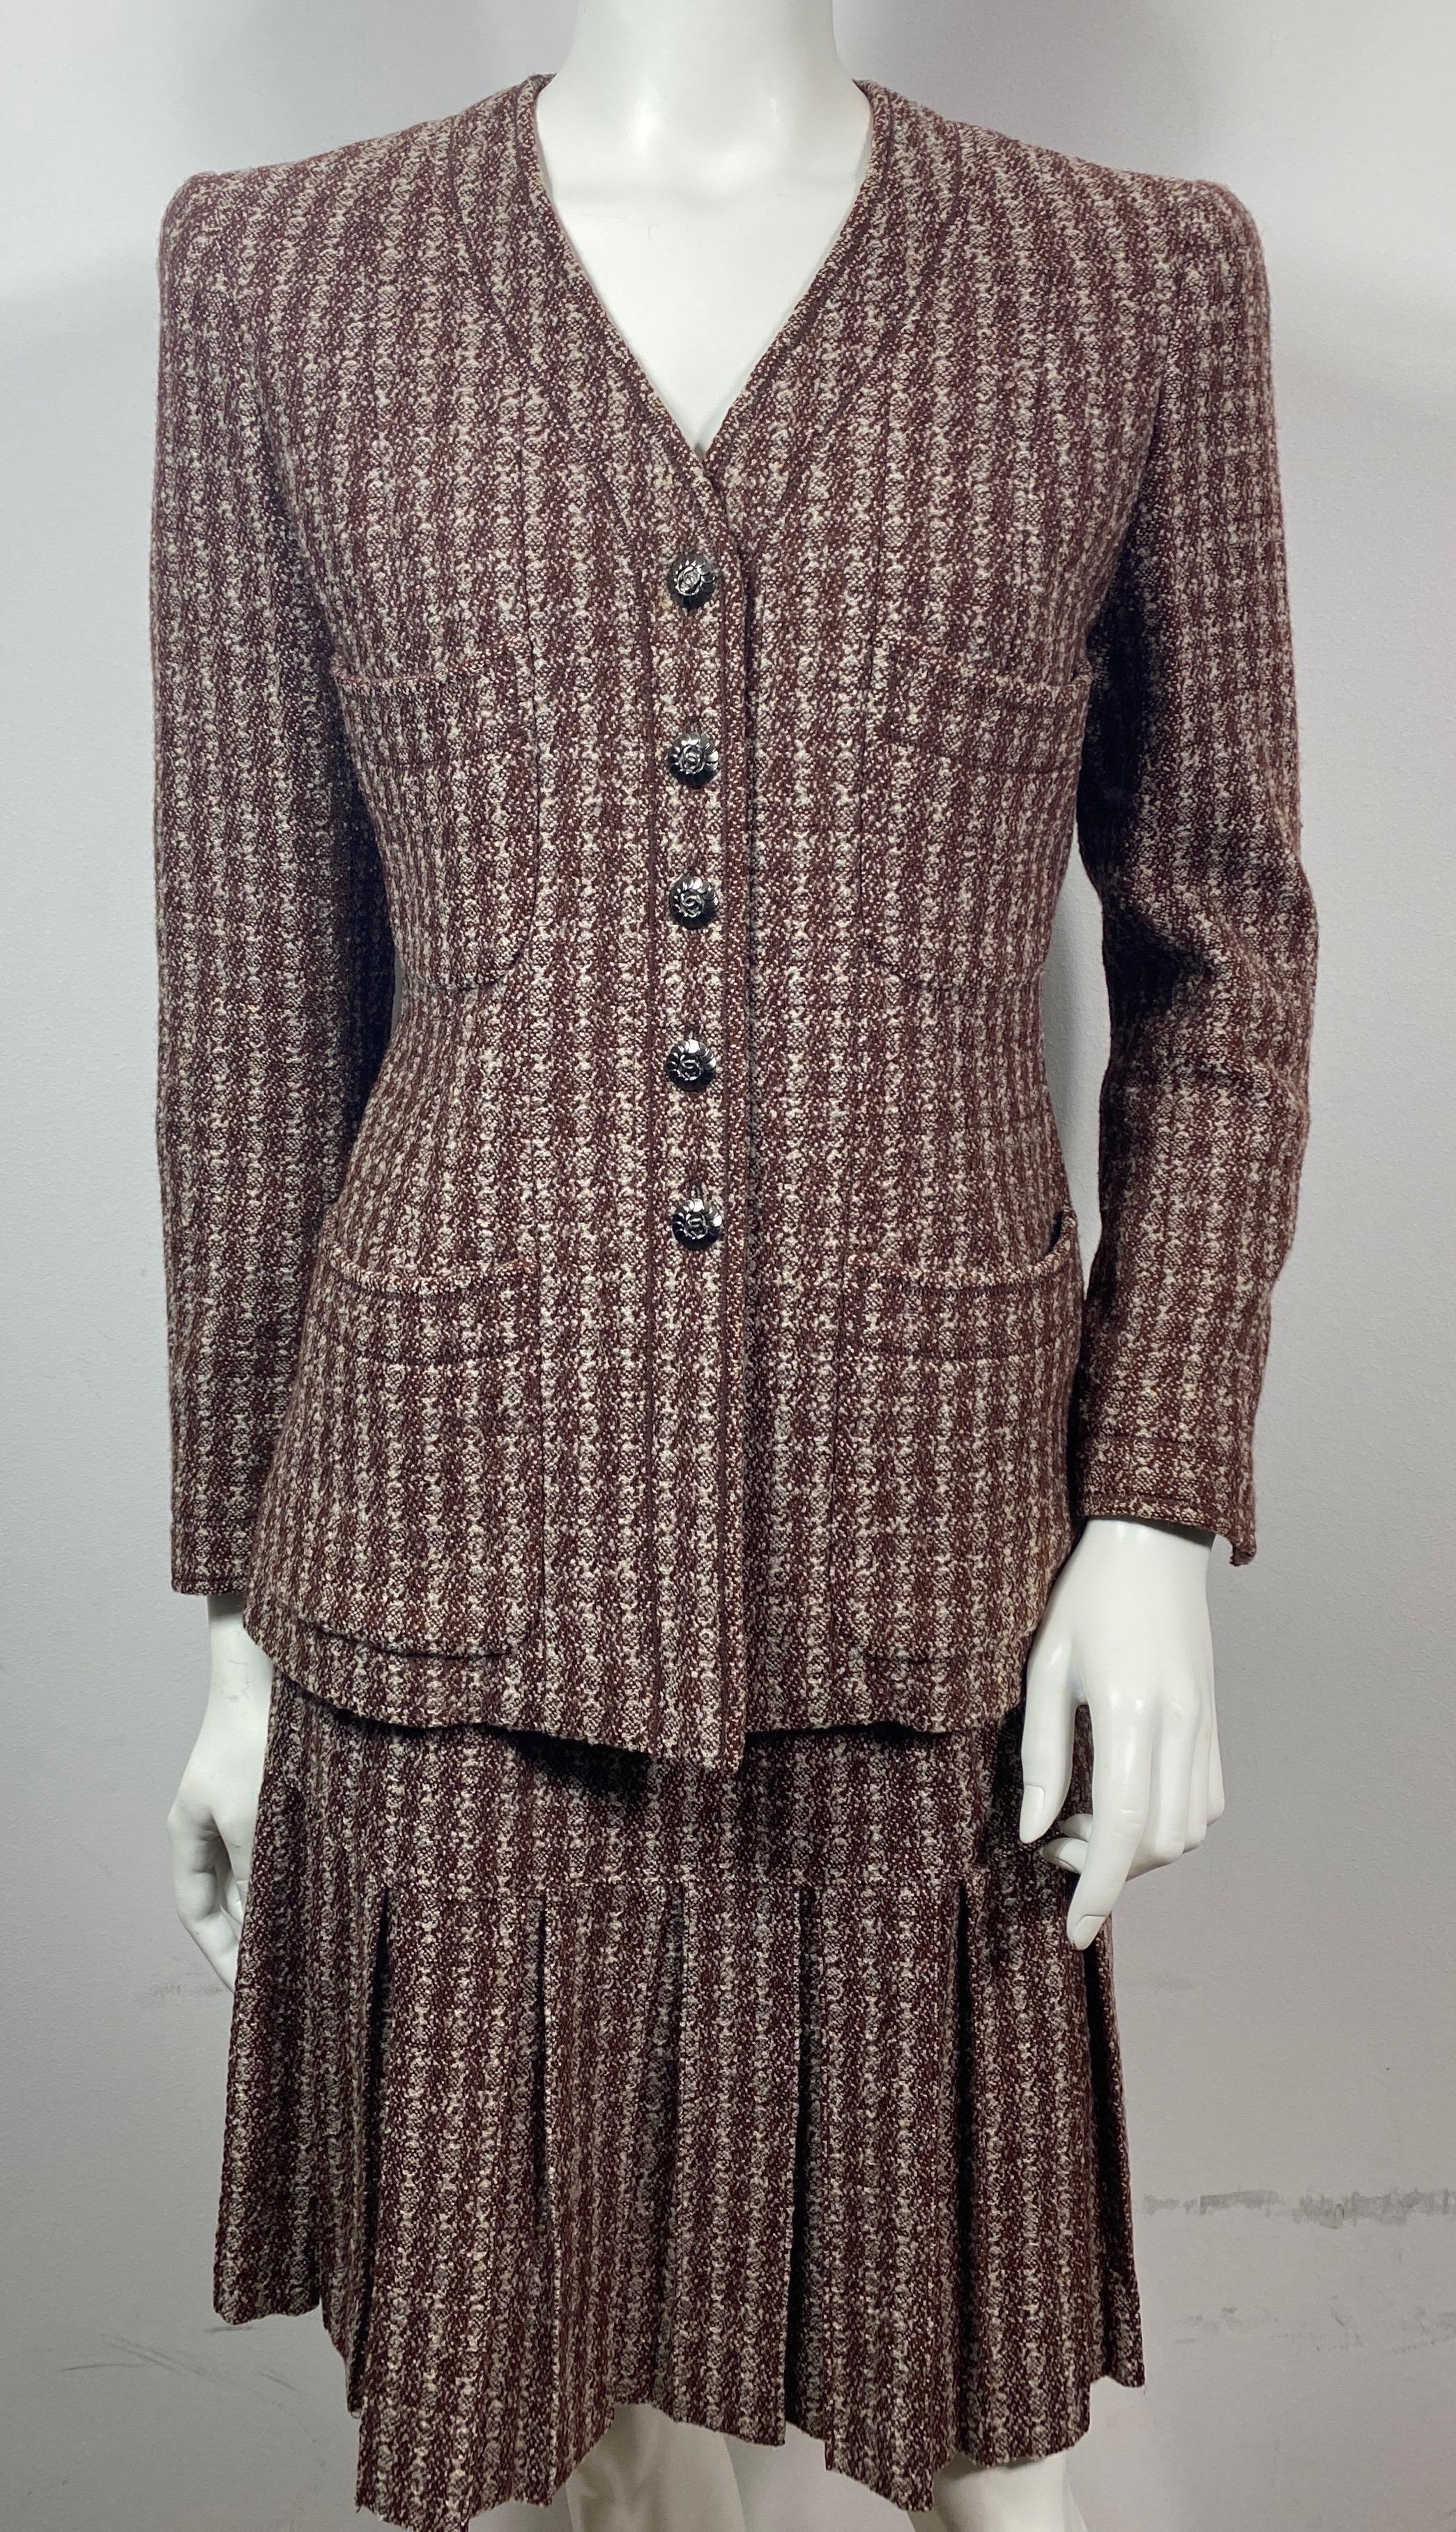 Chanel 1990’s Brown and Crème Wool Nailshead Tweed Skirt Suit-size 36  This 1997 Single Breasted skirt suit has a jacket with a subtle V neckline that is fully lined with silk CC logo fabric, has a platinum chain at the inside bottom of the jacket,